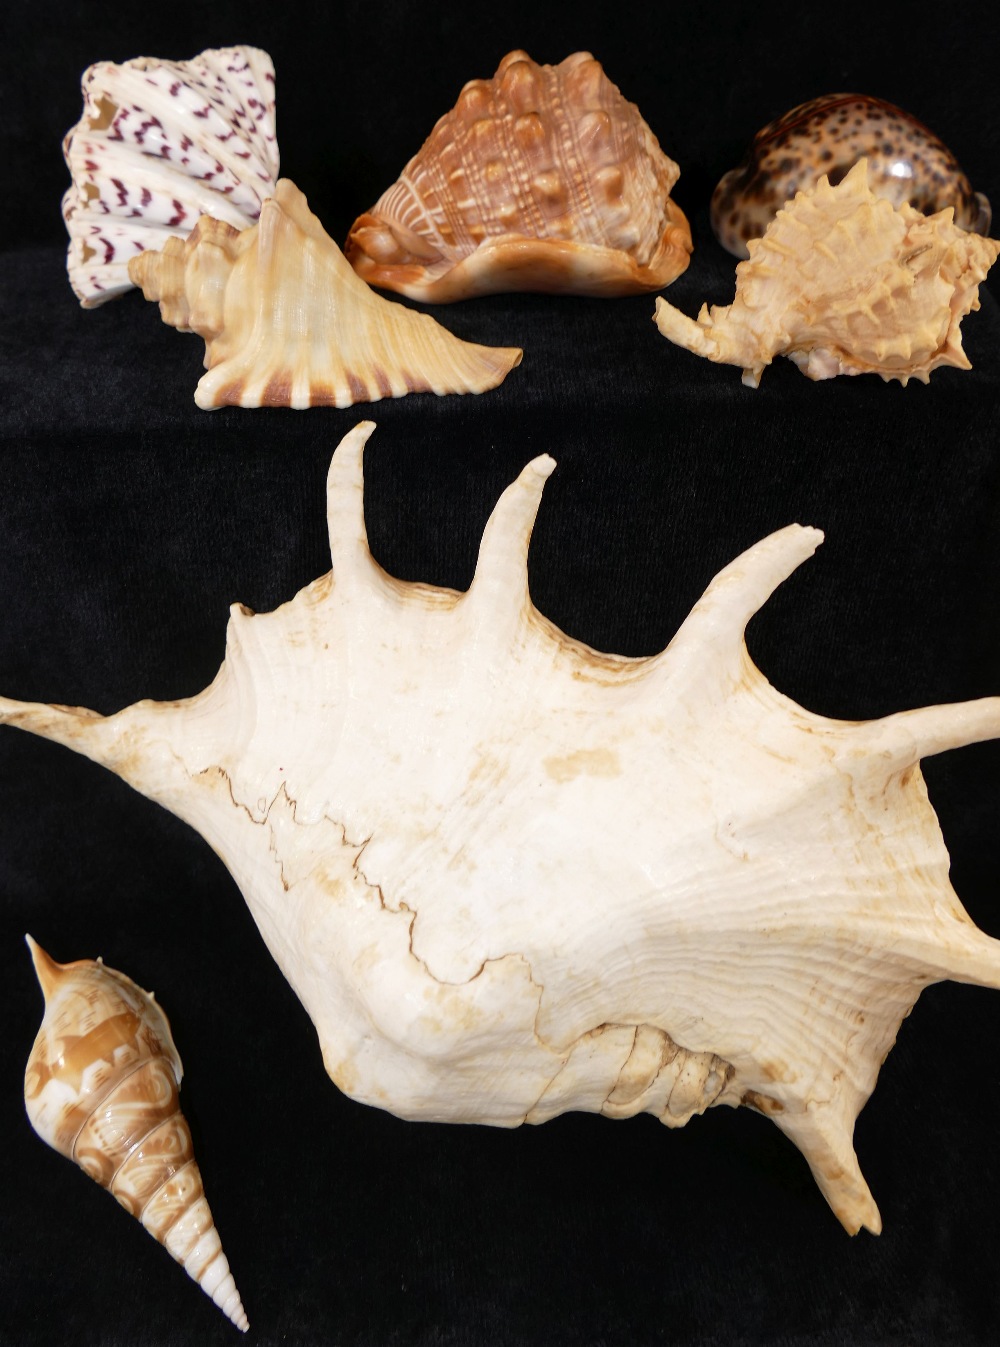 A collection of shells comprised of a conch, a bullmouth red helmet shell, a tiger cowrie, a bear